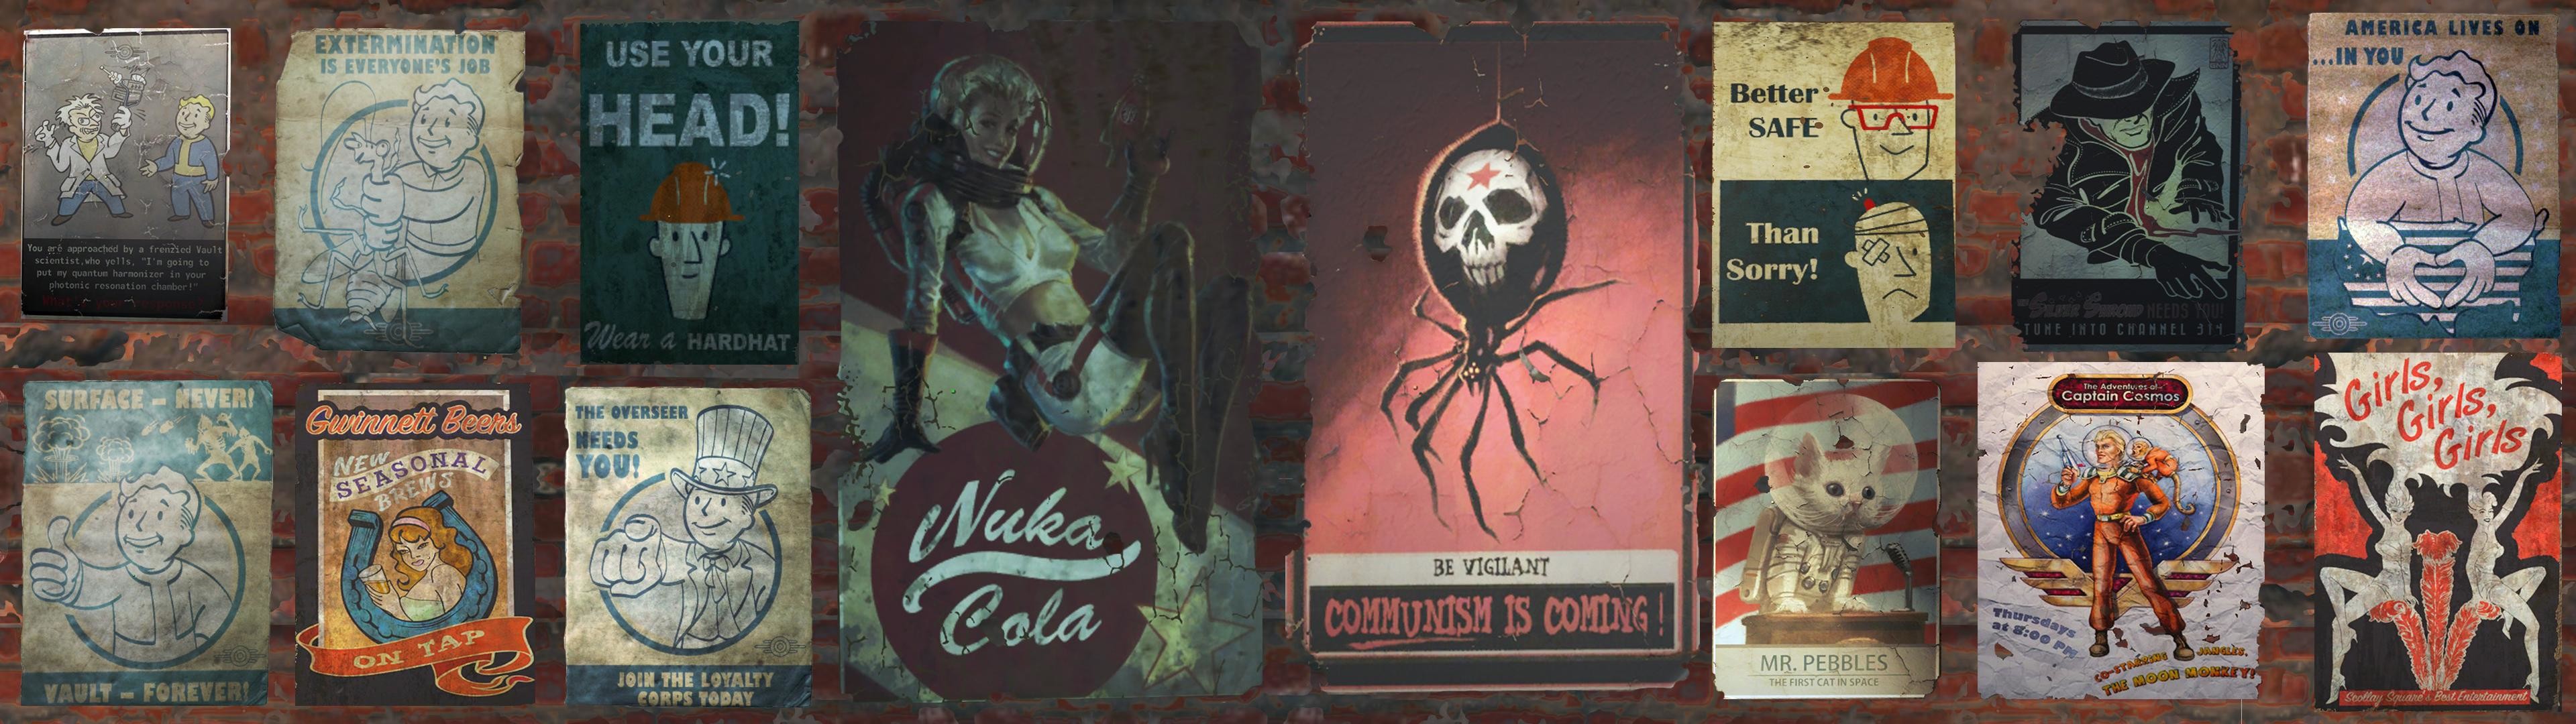 3840x1080 I made a dual screen  wallpaper out of some of the posters that I  have come across in the wasteland.